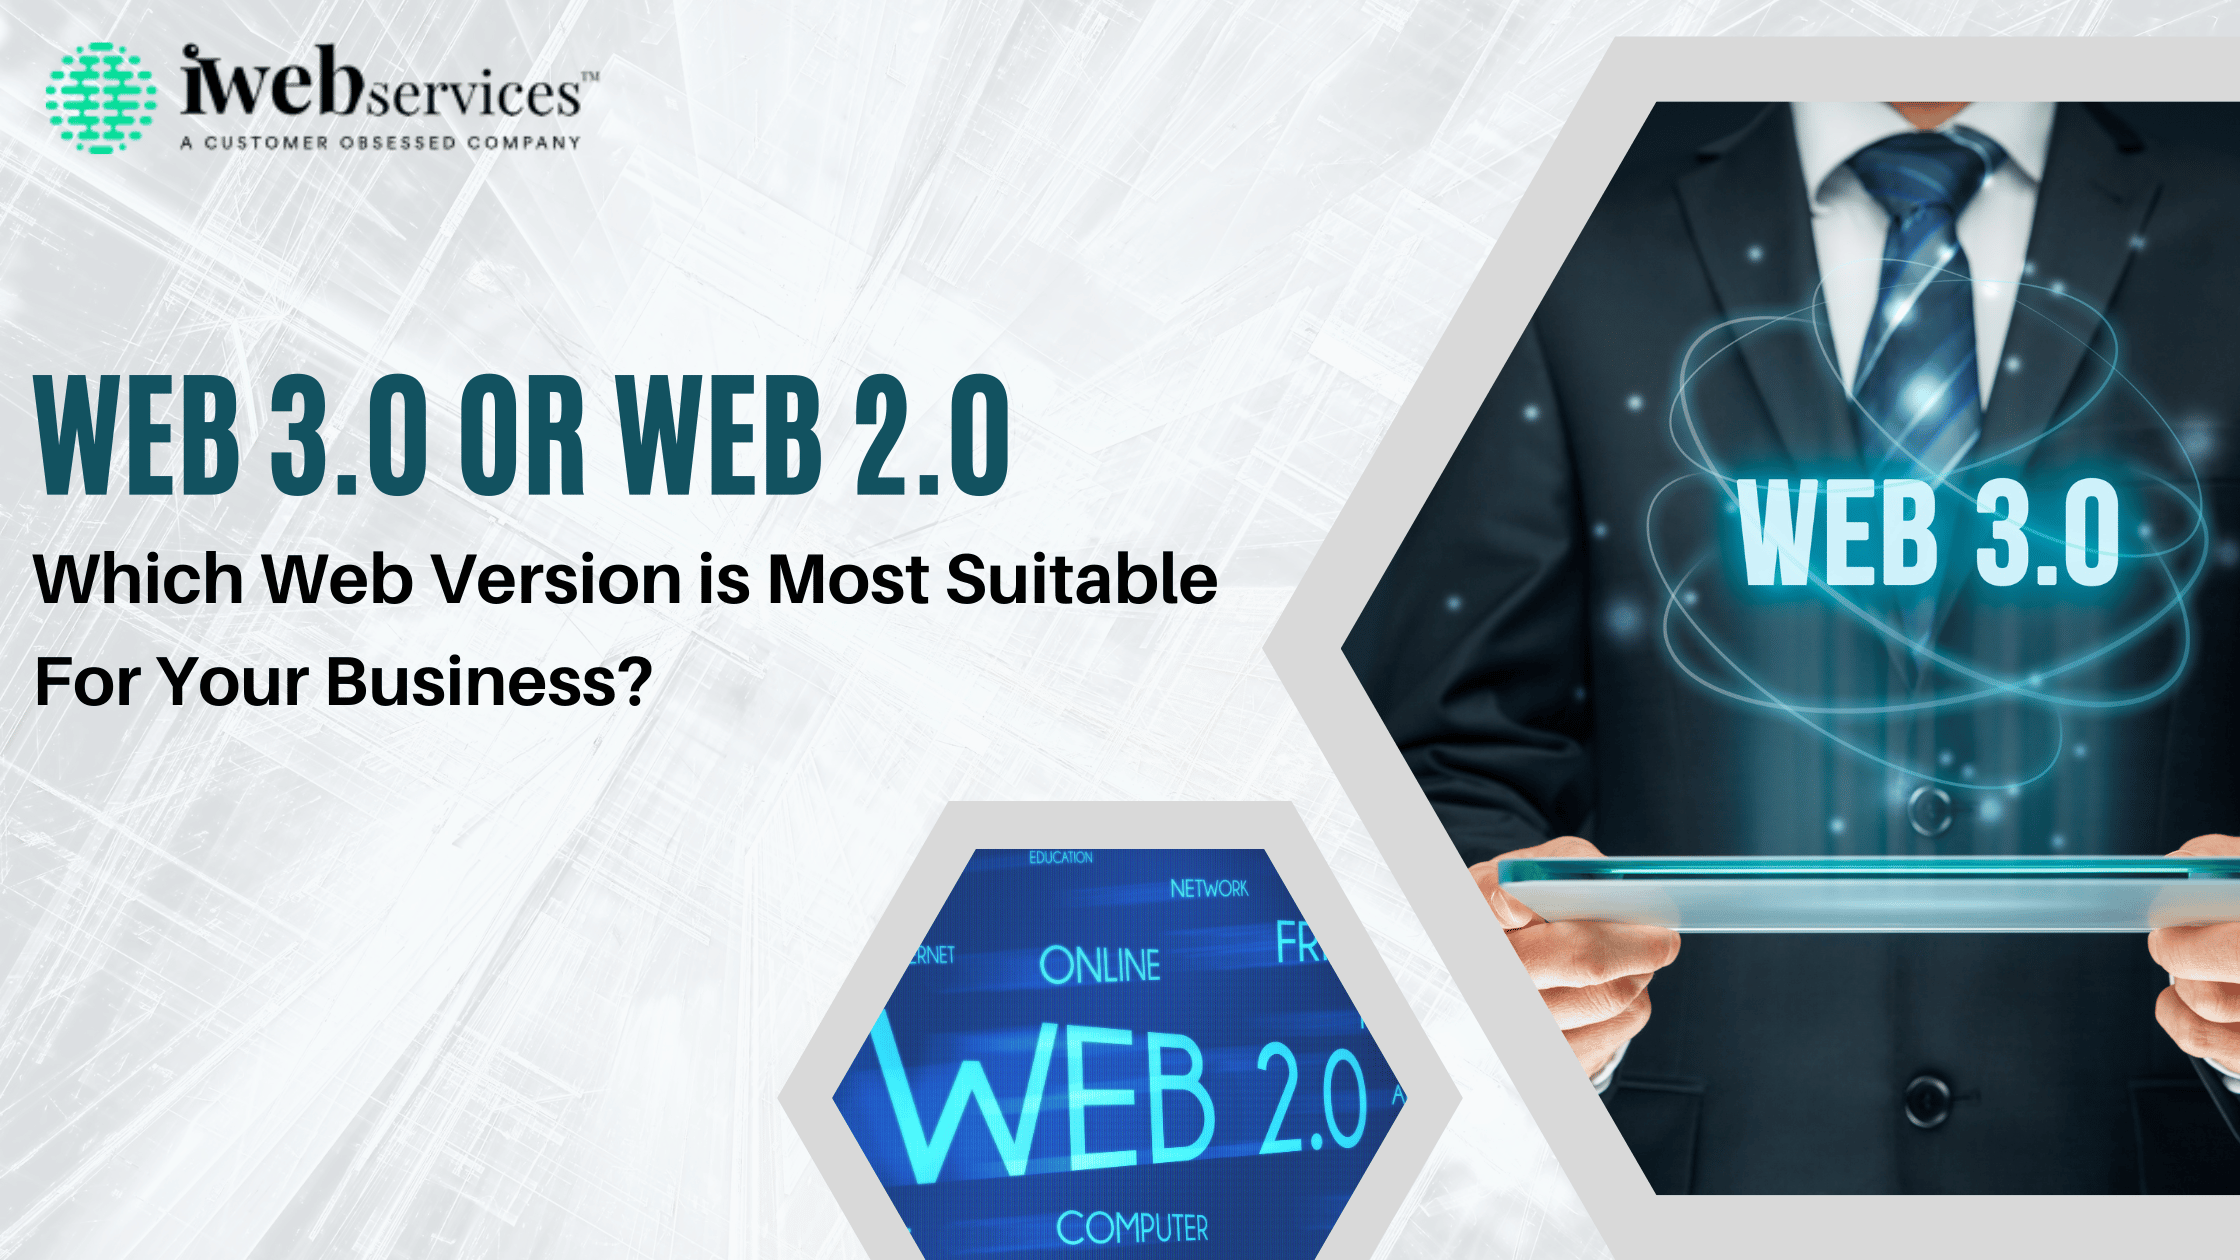 Web 3.0 vs. Web 2.0: Which Web Version is Most Suitable For Your Business?